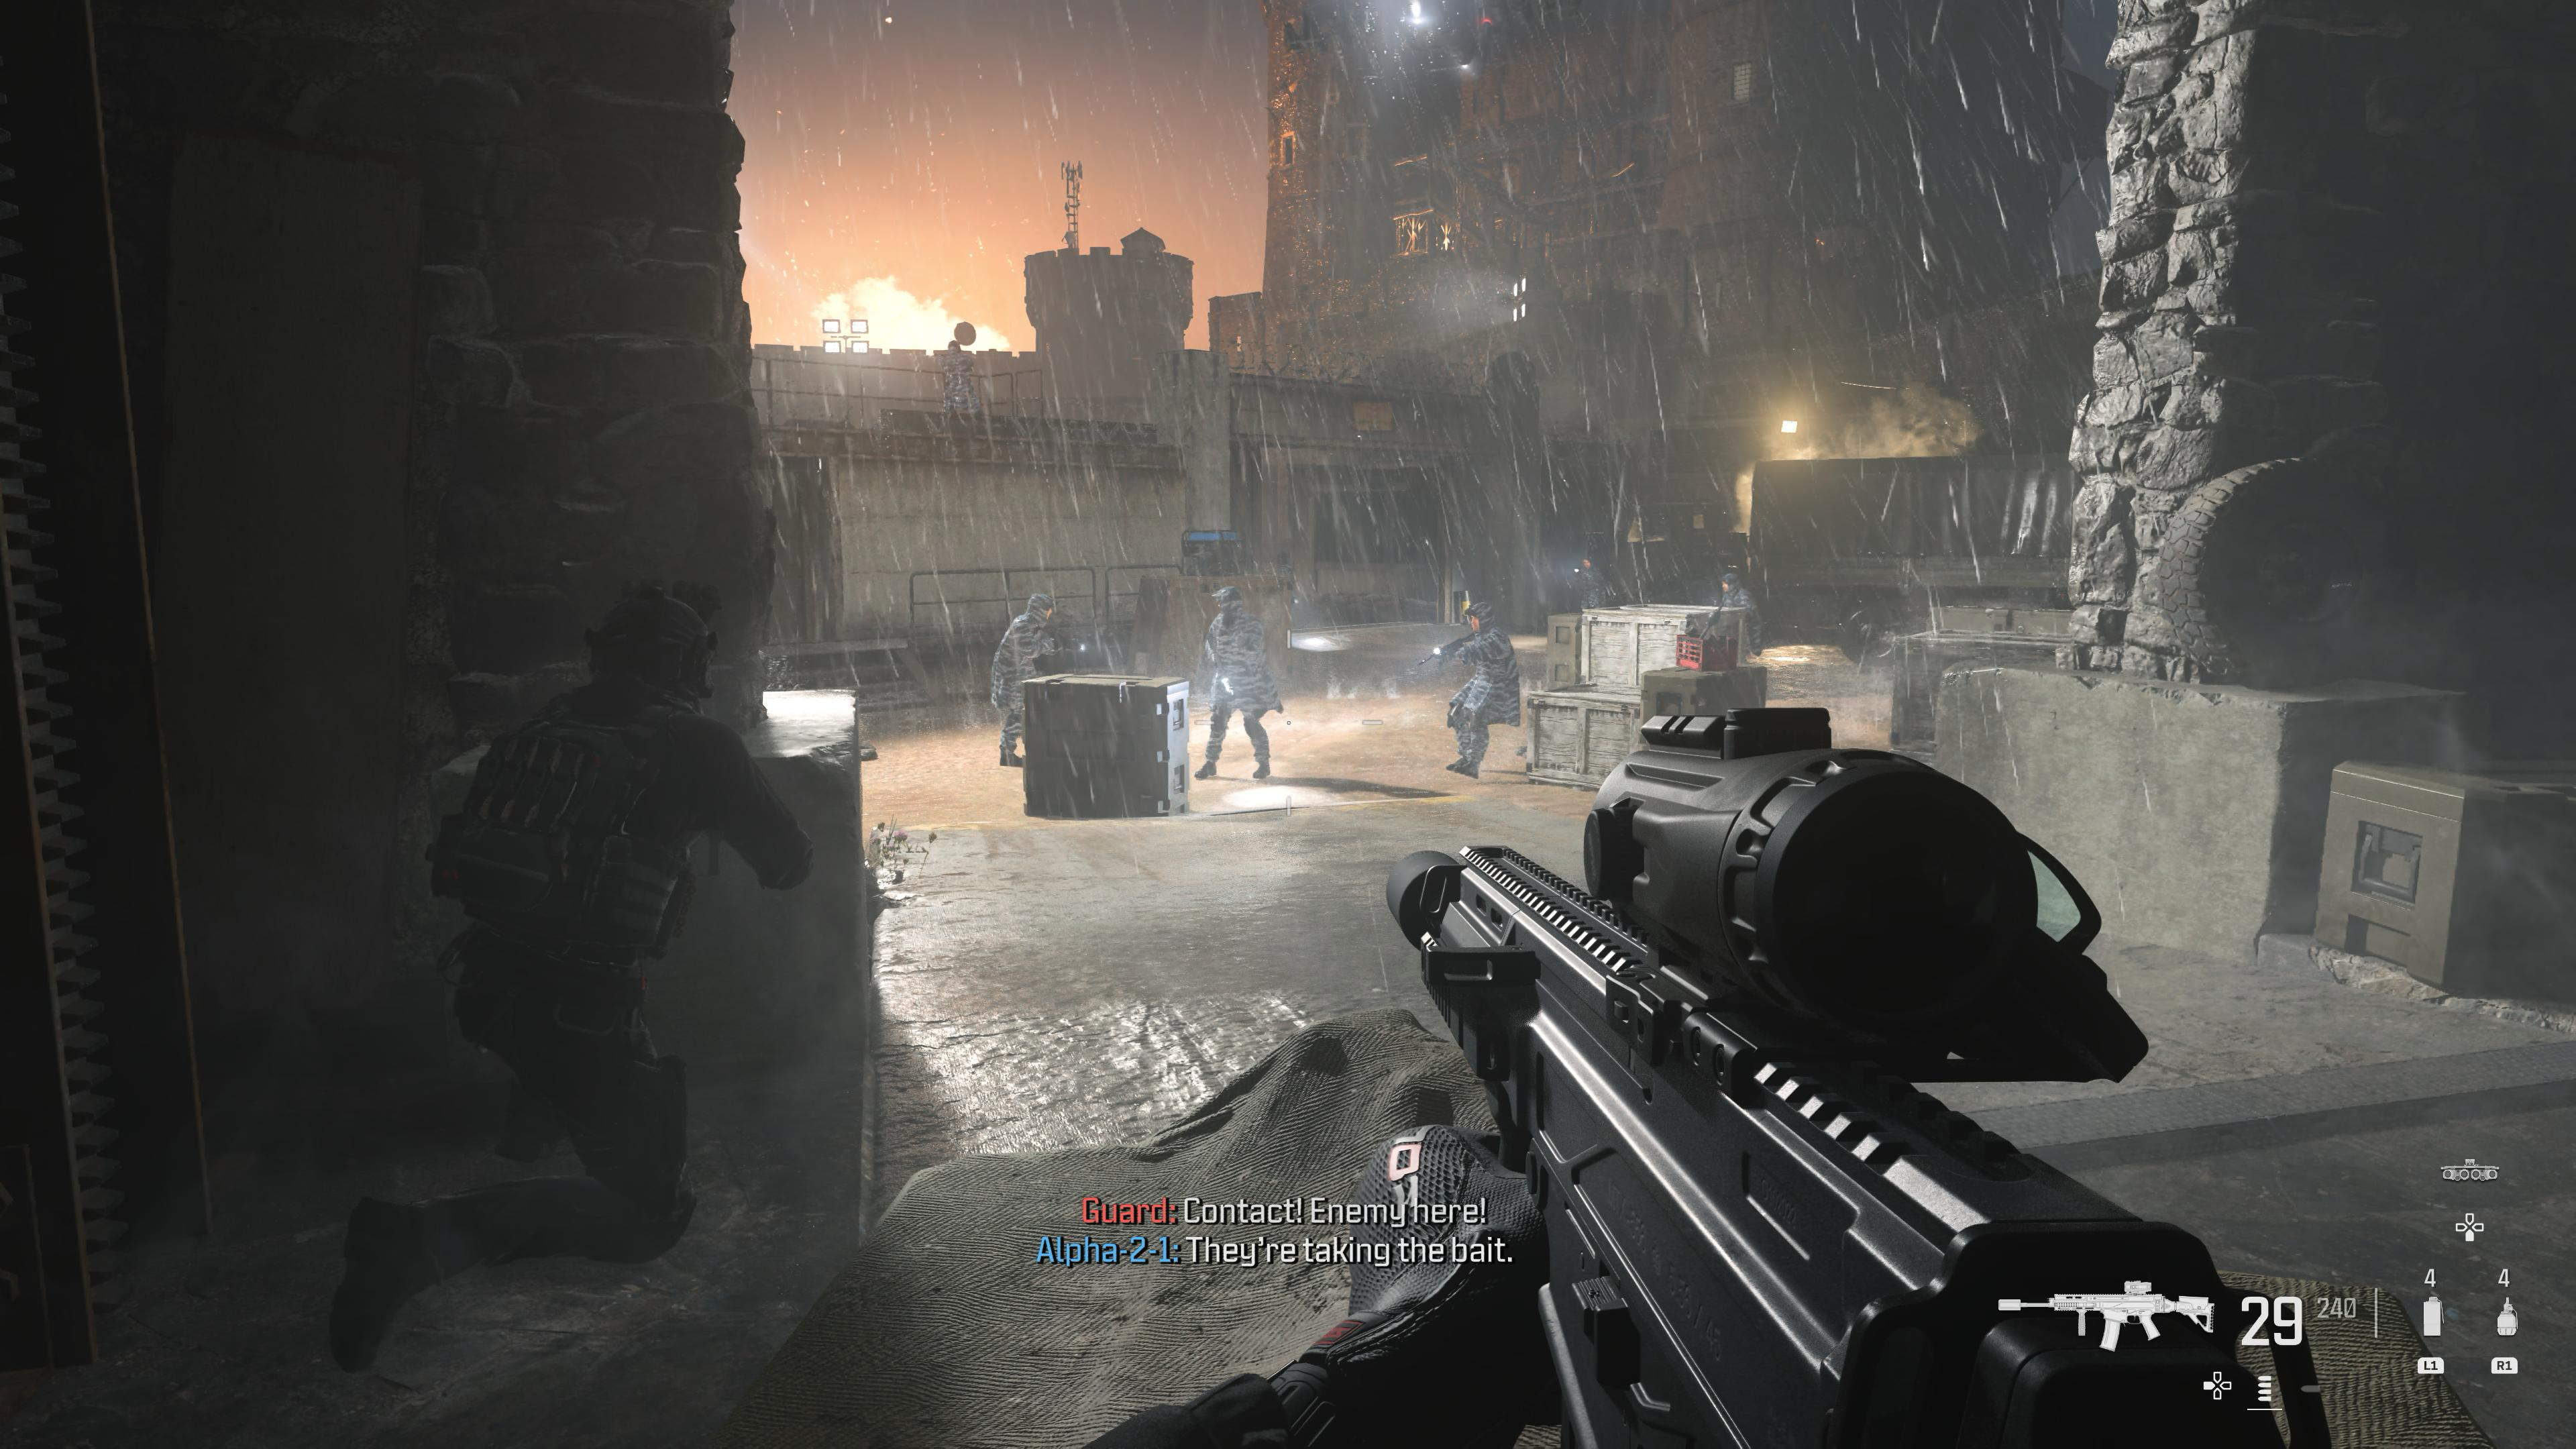 Call of Duty Modern Warfare 2 Was More Than Just a Game